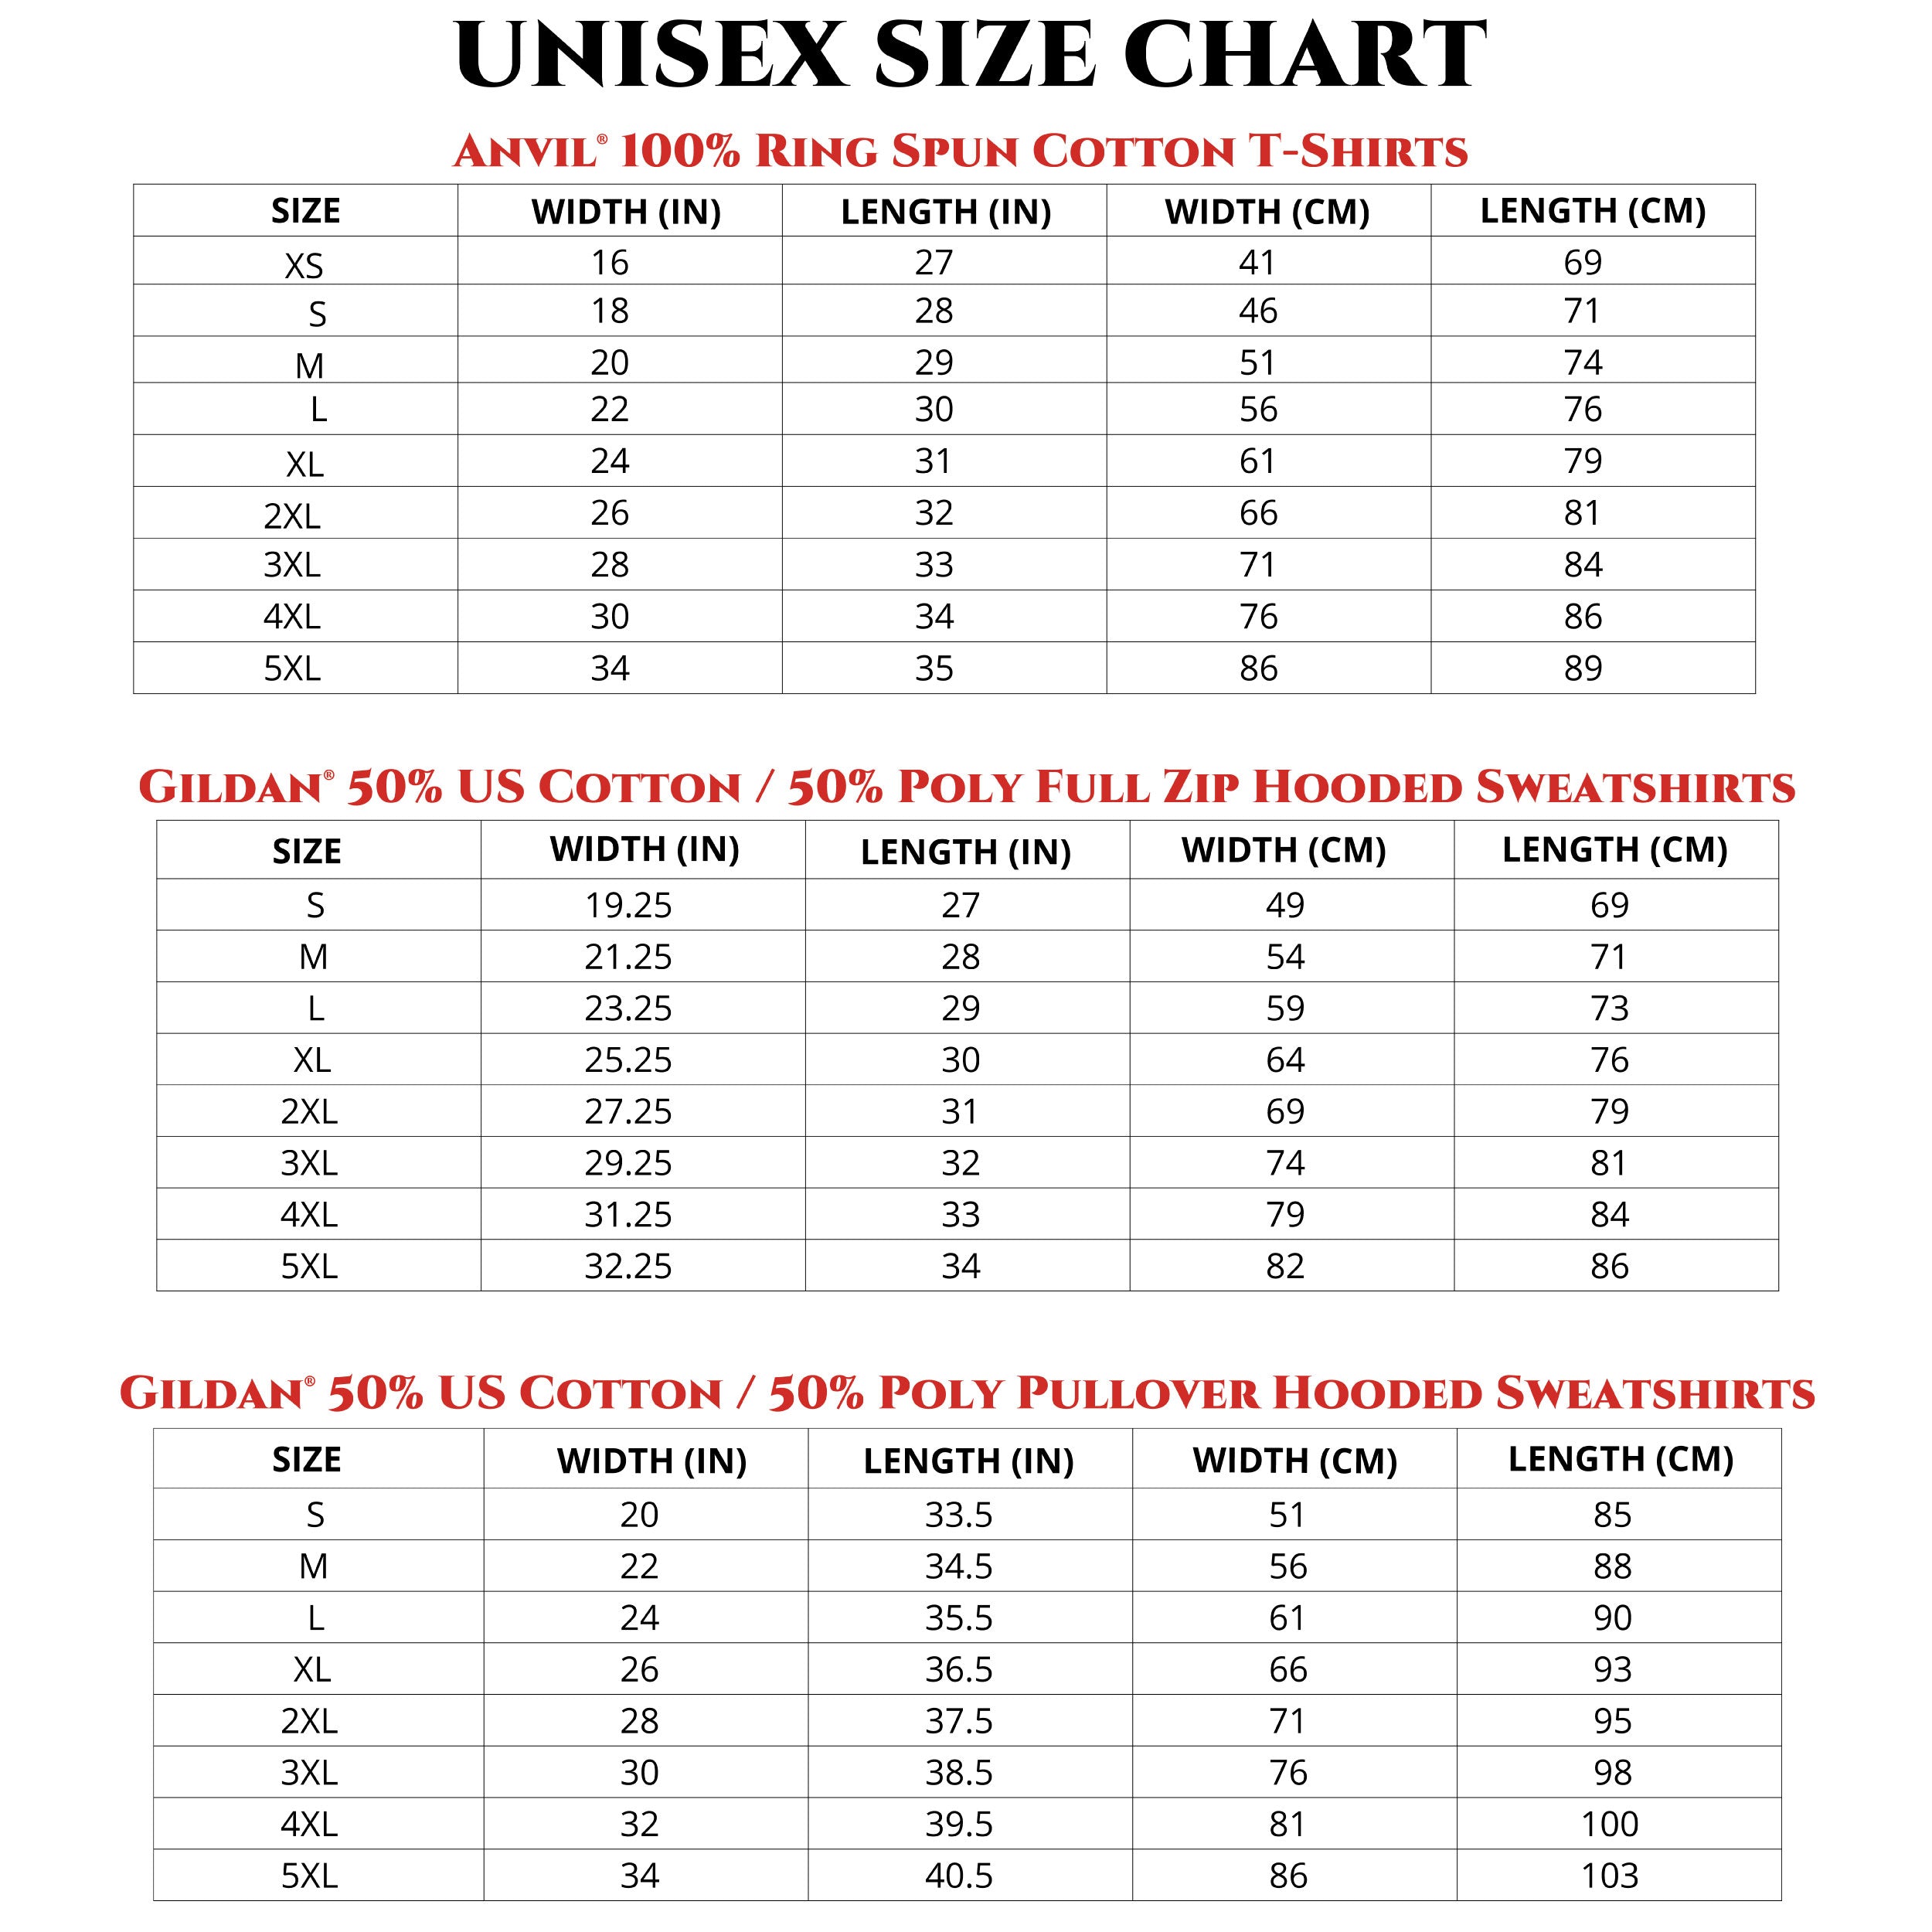 How to Measure Your Ring Size & Ring Size Chart – Tiara.com.sg